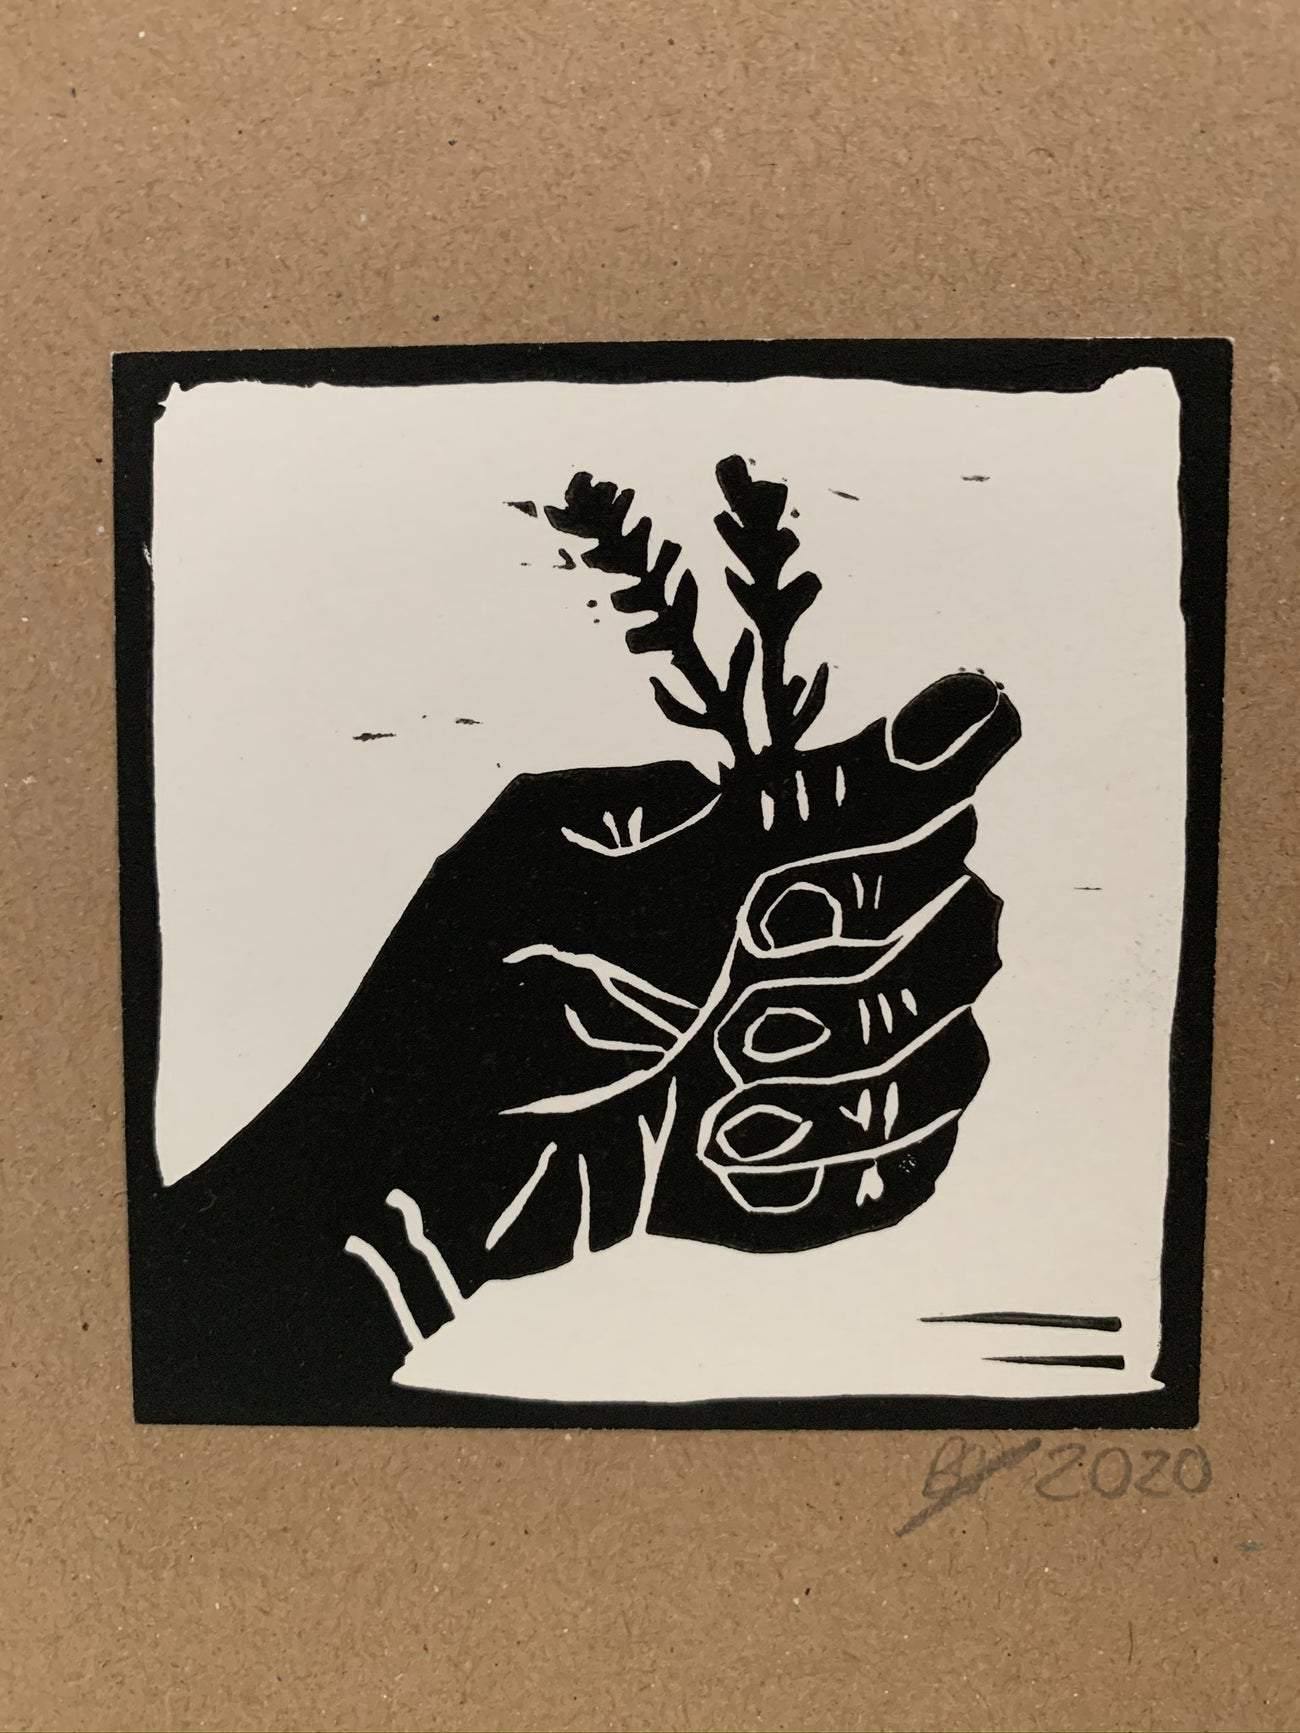 Monochrome drawing of lavender sprig in hand close up of sympathy card design made in London